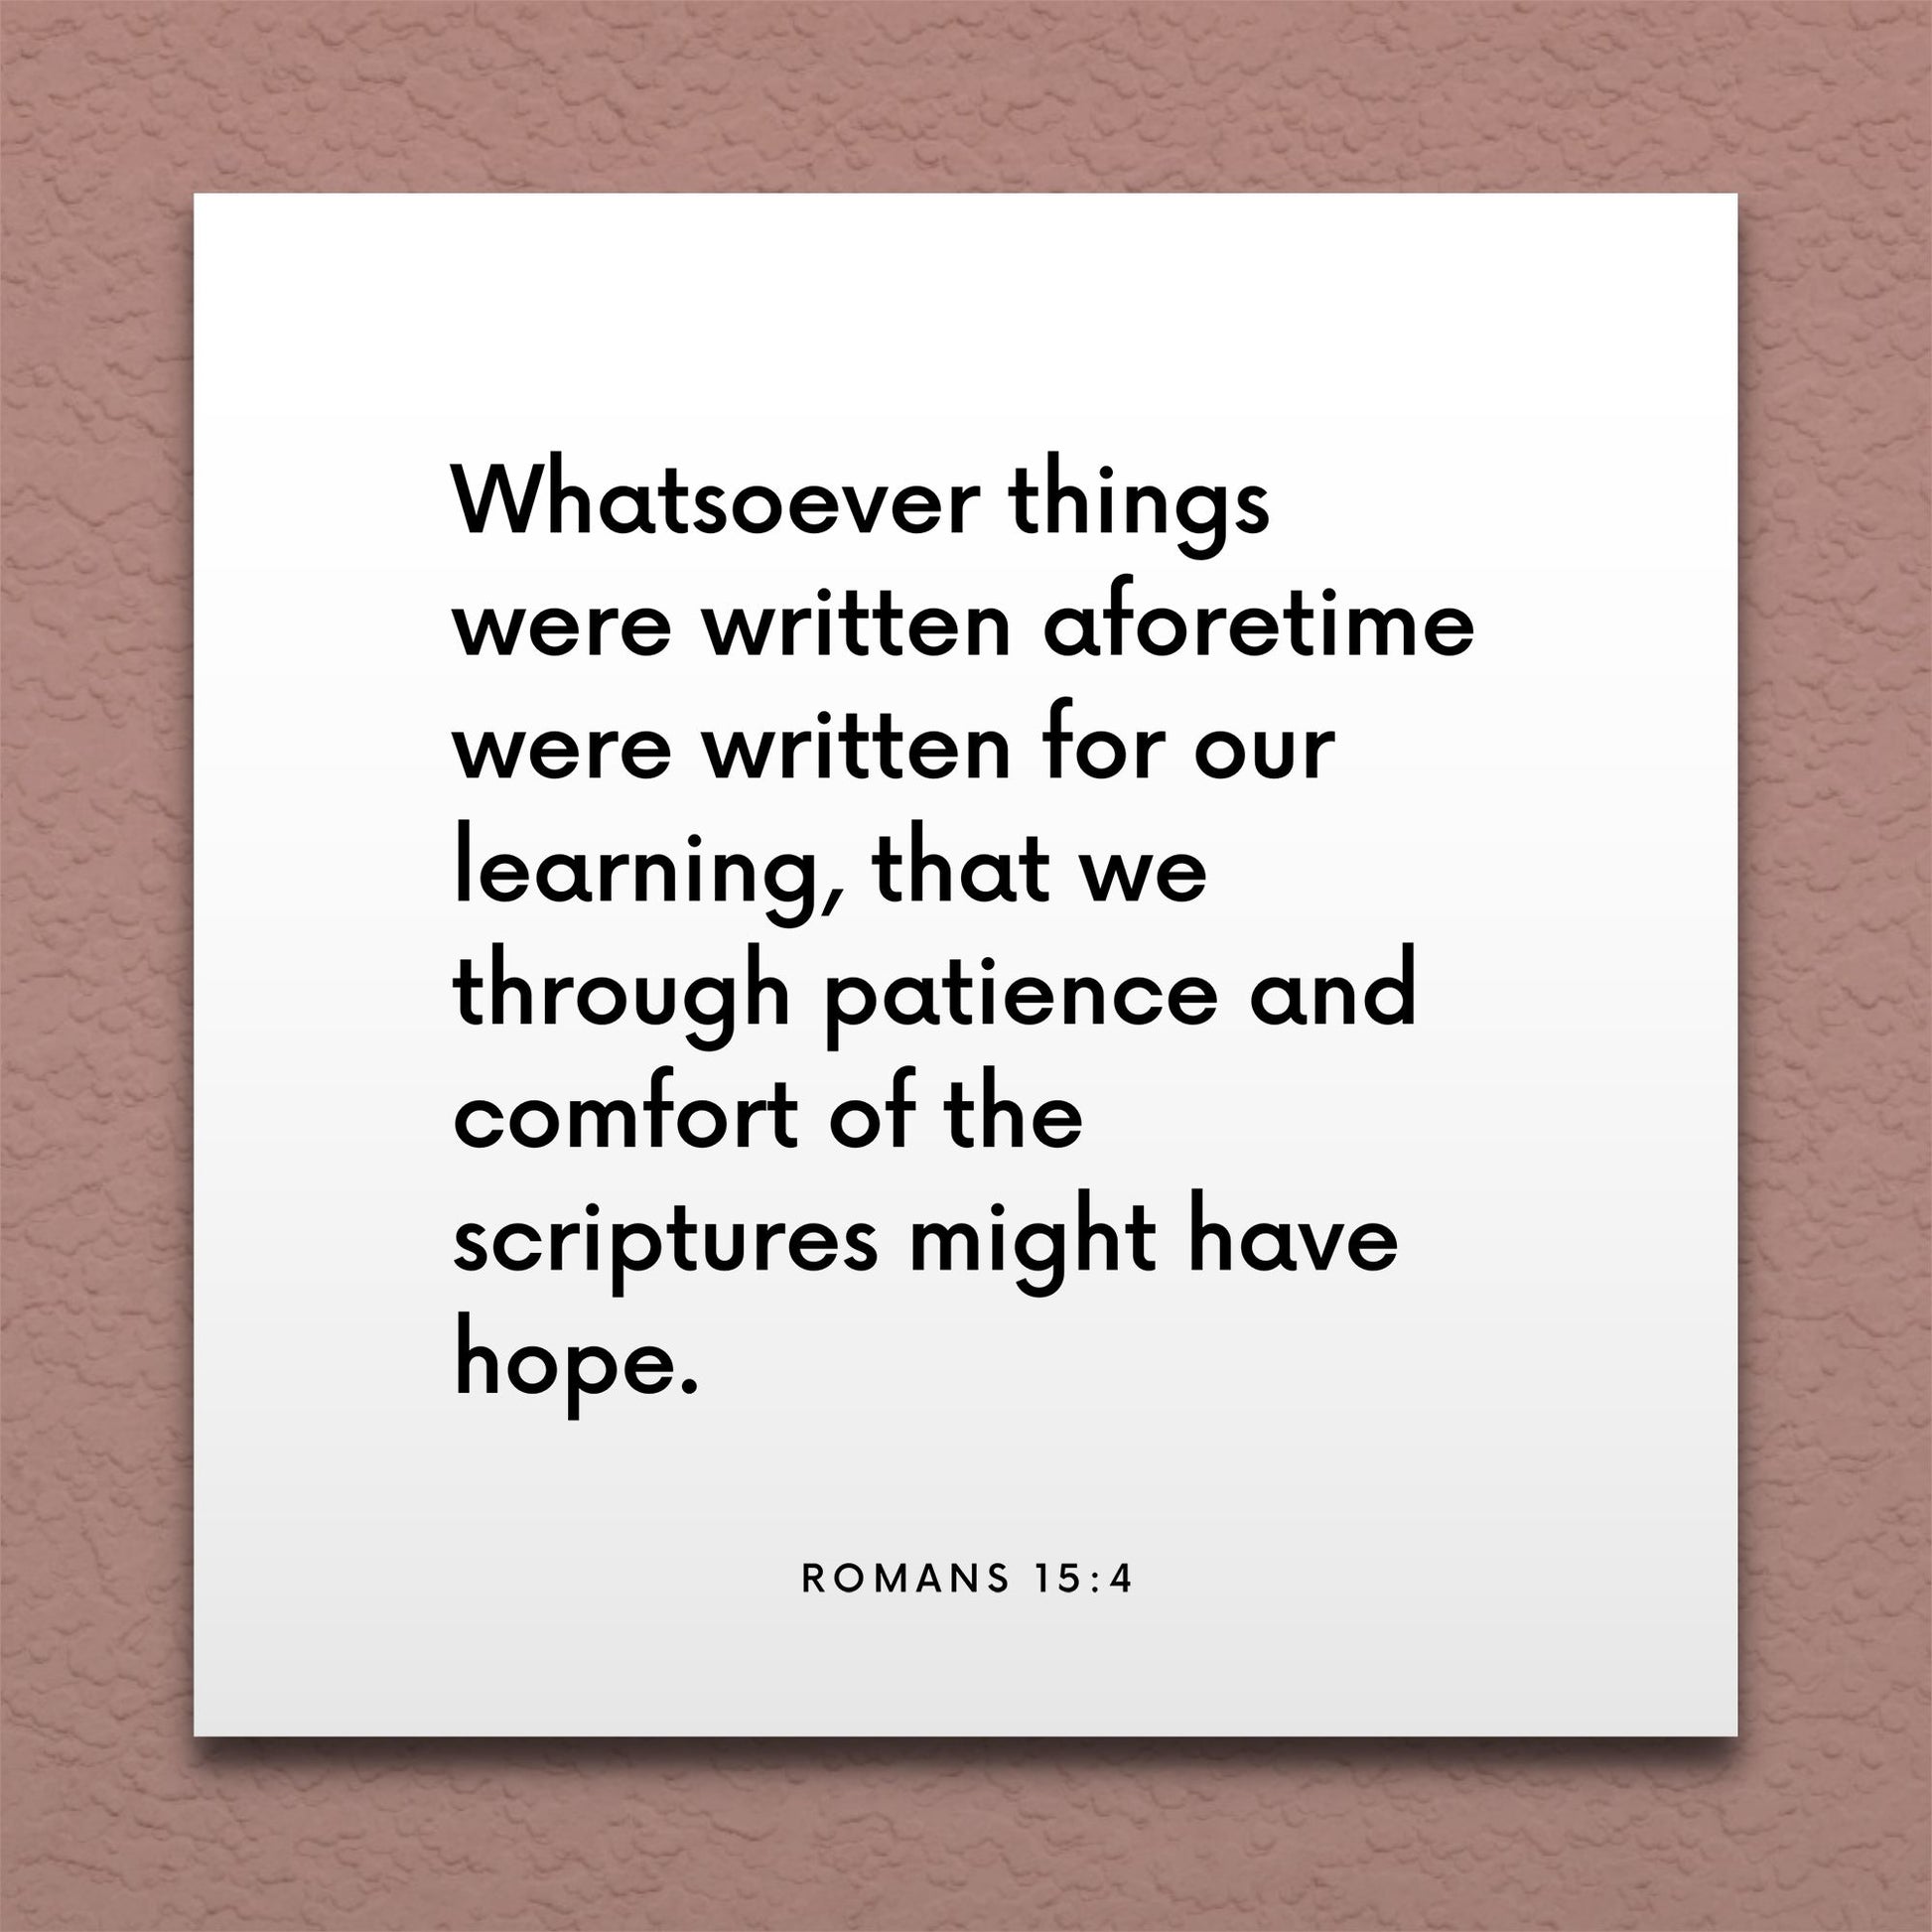 Wall-mounted scripture tile for Romans 15:4 - "Through patience and comfort of the scriptures"